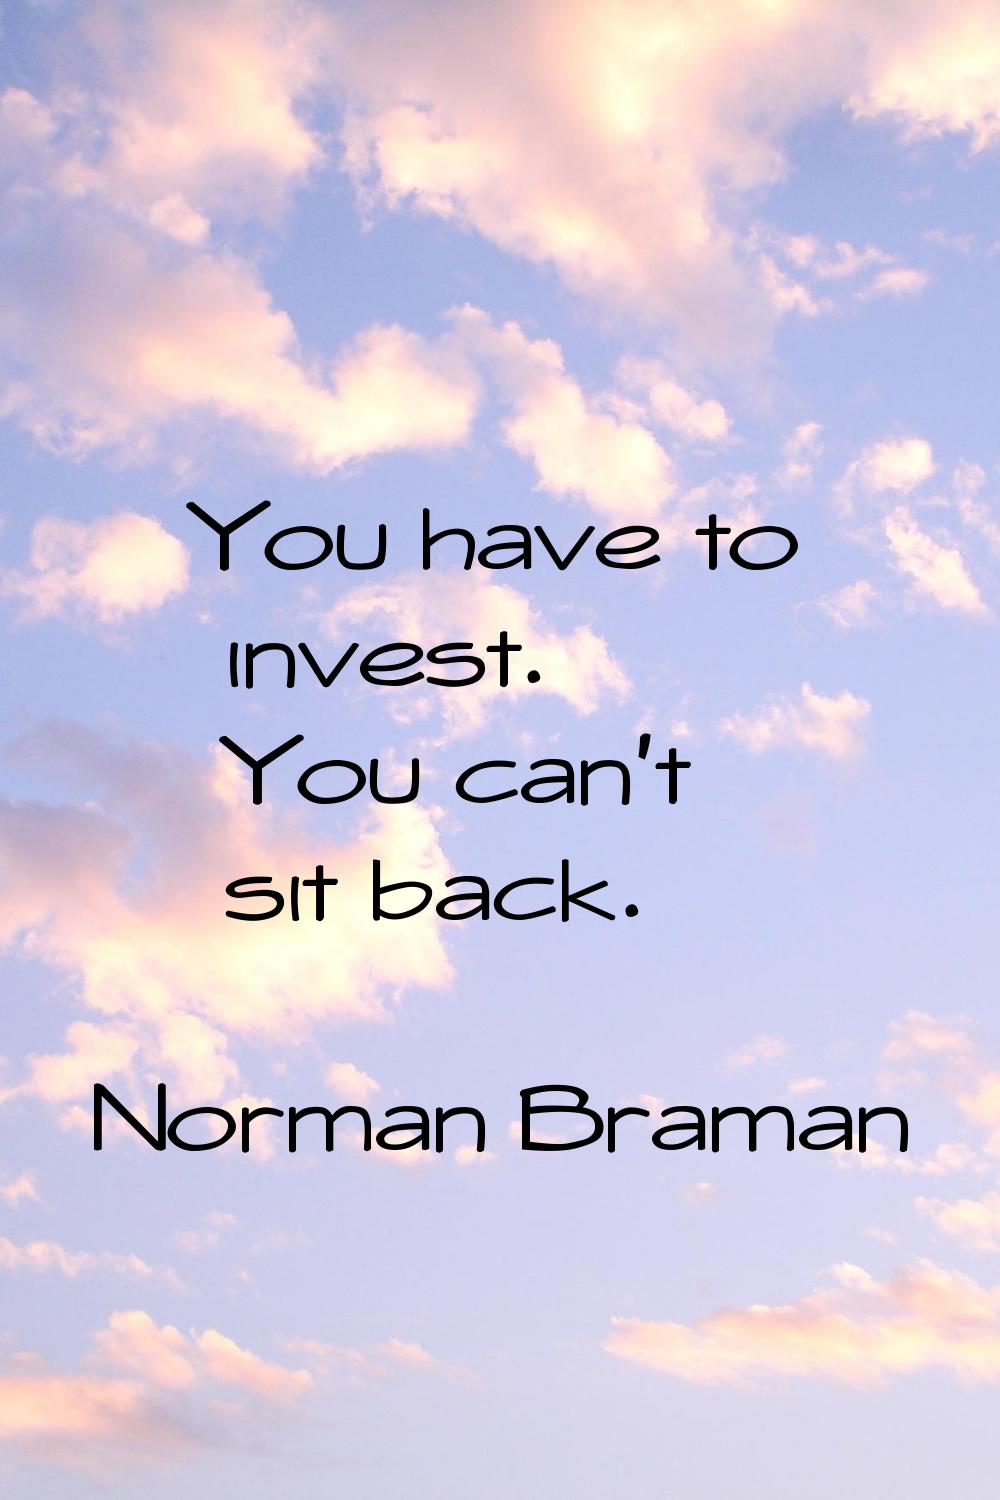 You have to invest. You can't sit back.